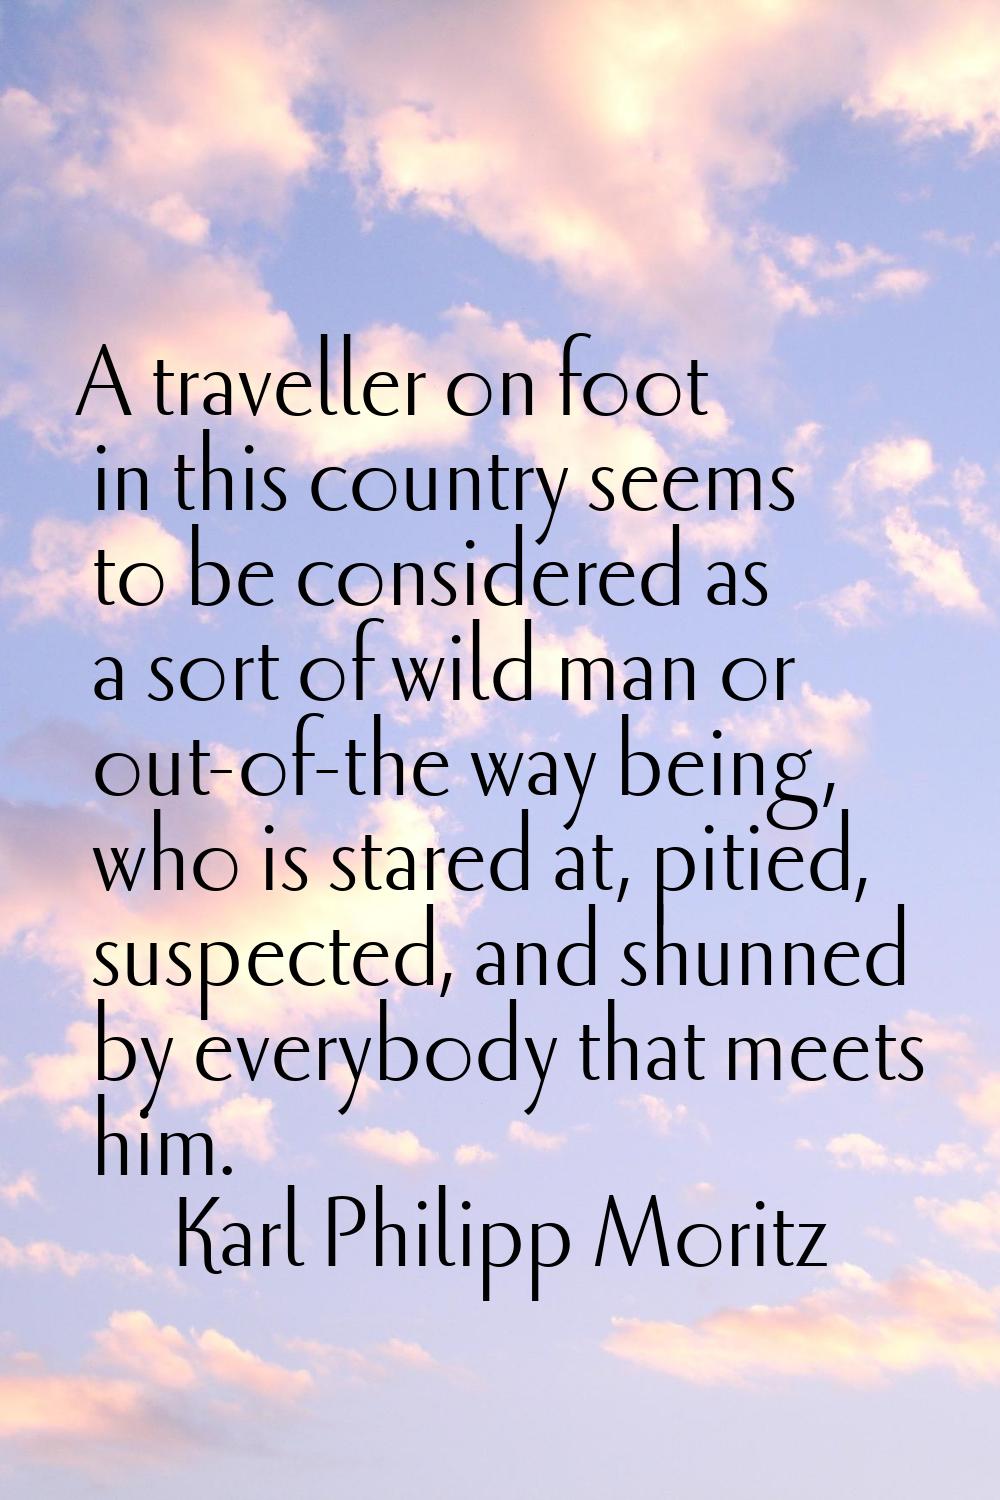 A traveller on foot in this country seems to be considered as a sort of wild man or out-of-the way 